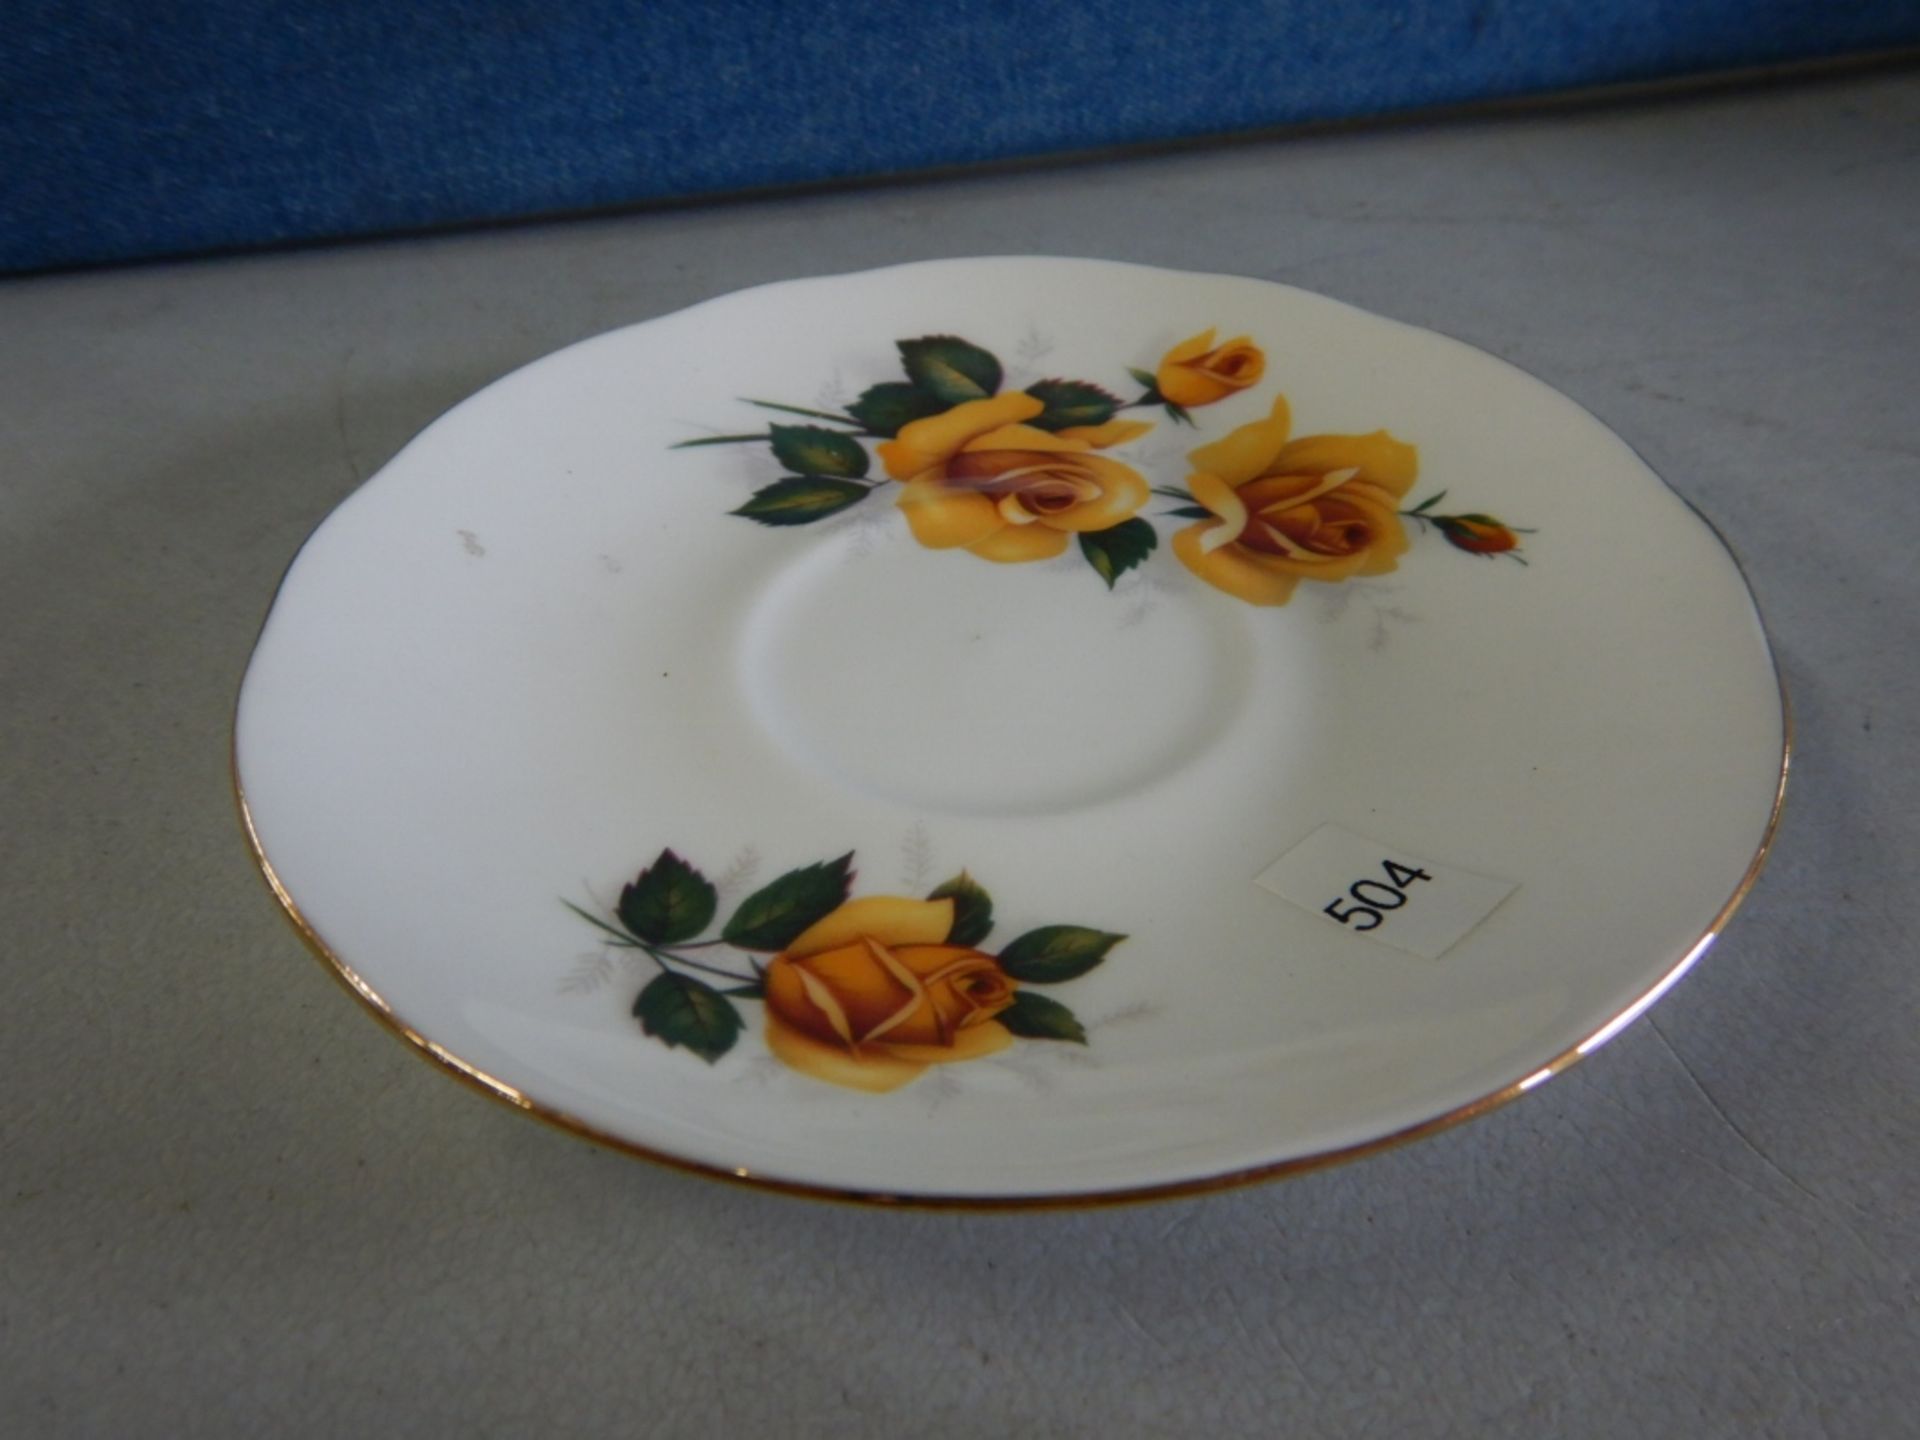 ANTIQUE TEACUPS & SAUCERS - MADE IN ENGLAND - LOT OF 7 - BONE CHINA #8273 - YELLOW FLOWERS, # - Image 21 of 33